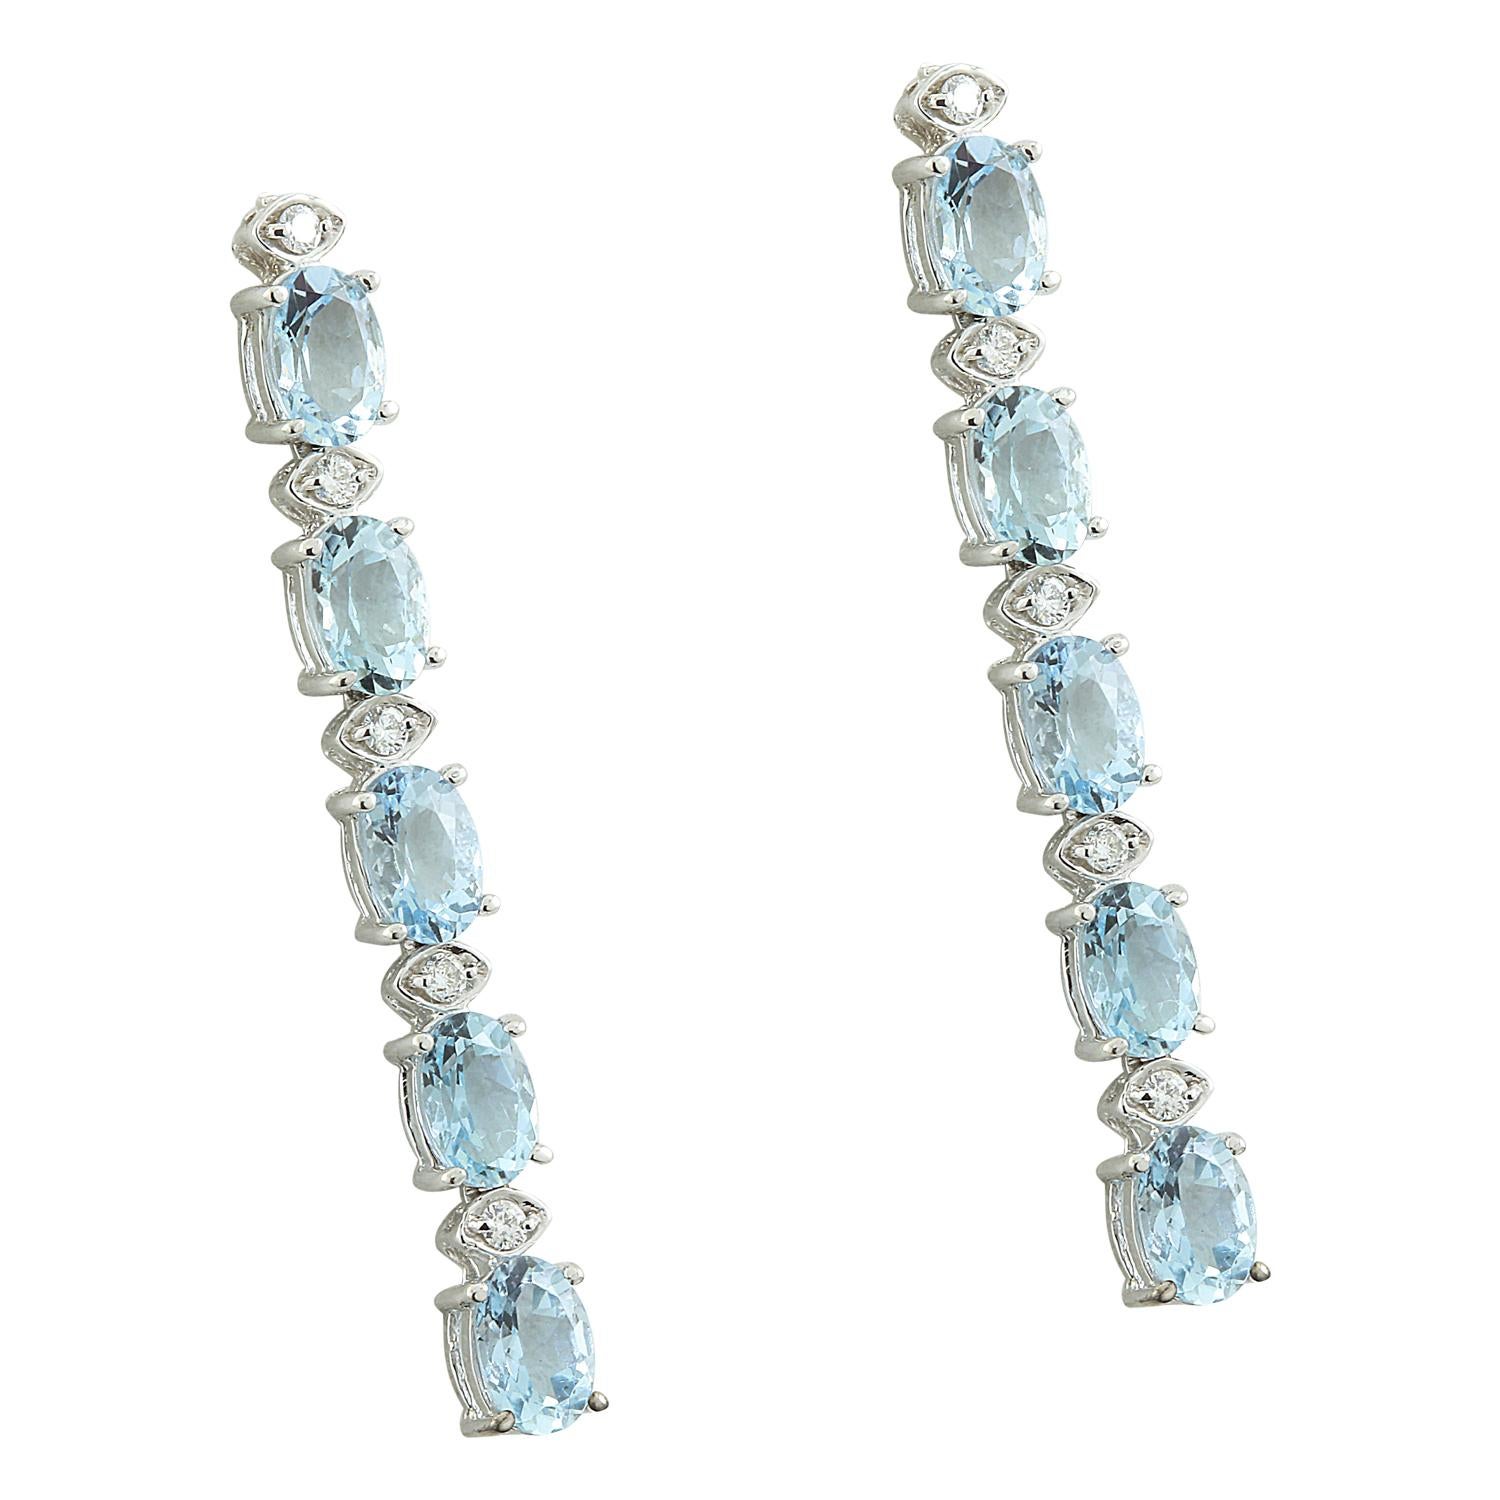 Introducing our stunning Natural Aquamarine Diamond Earrings, meticulously crafted in luxurious 14K Solid White Gold. These exquisite earrings are a true testament to timeless beauty and exceptional craftsmanship, making them a perfect addition to